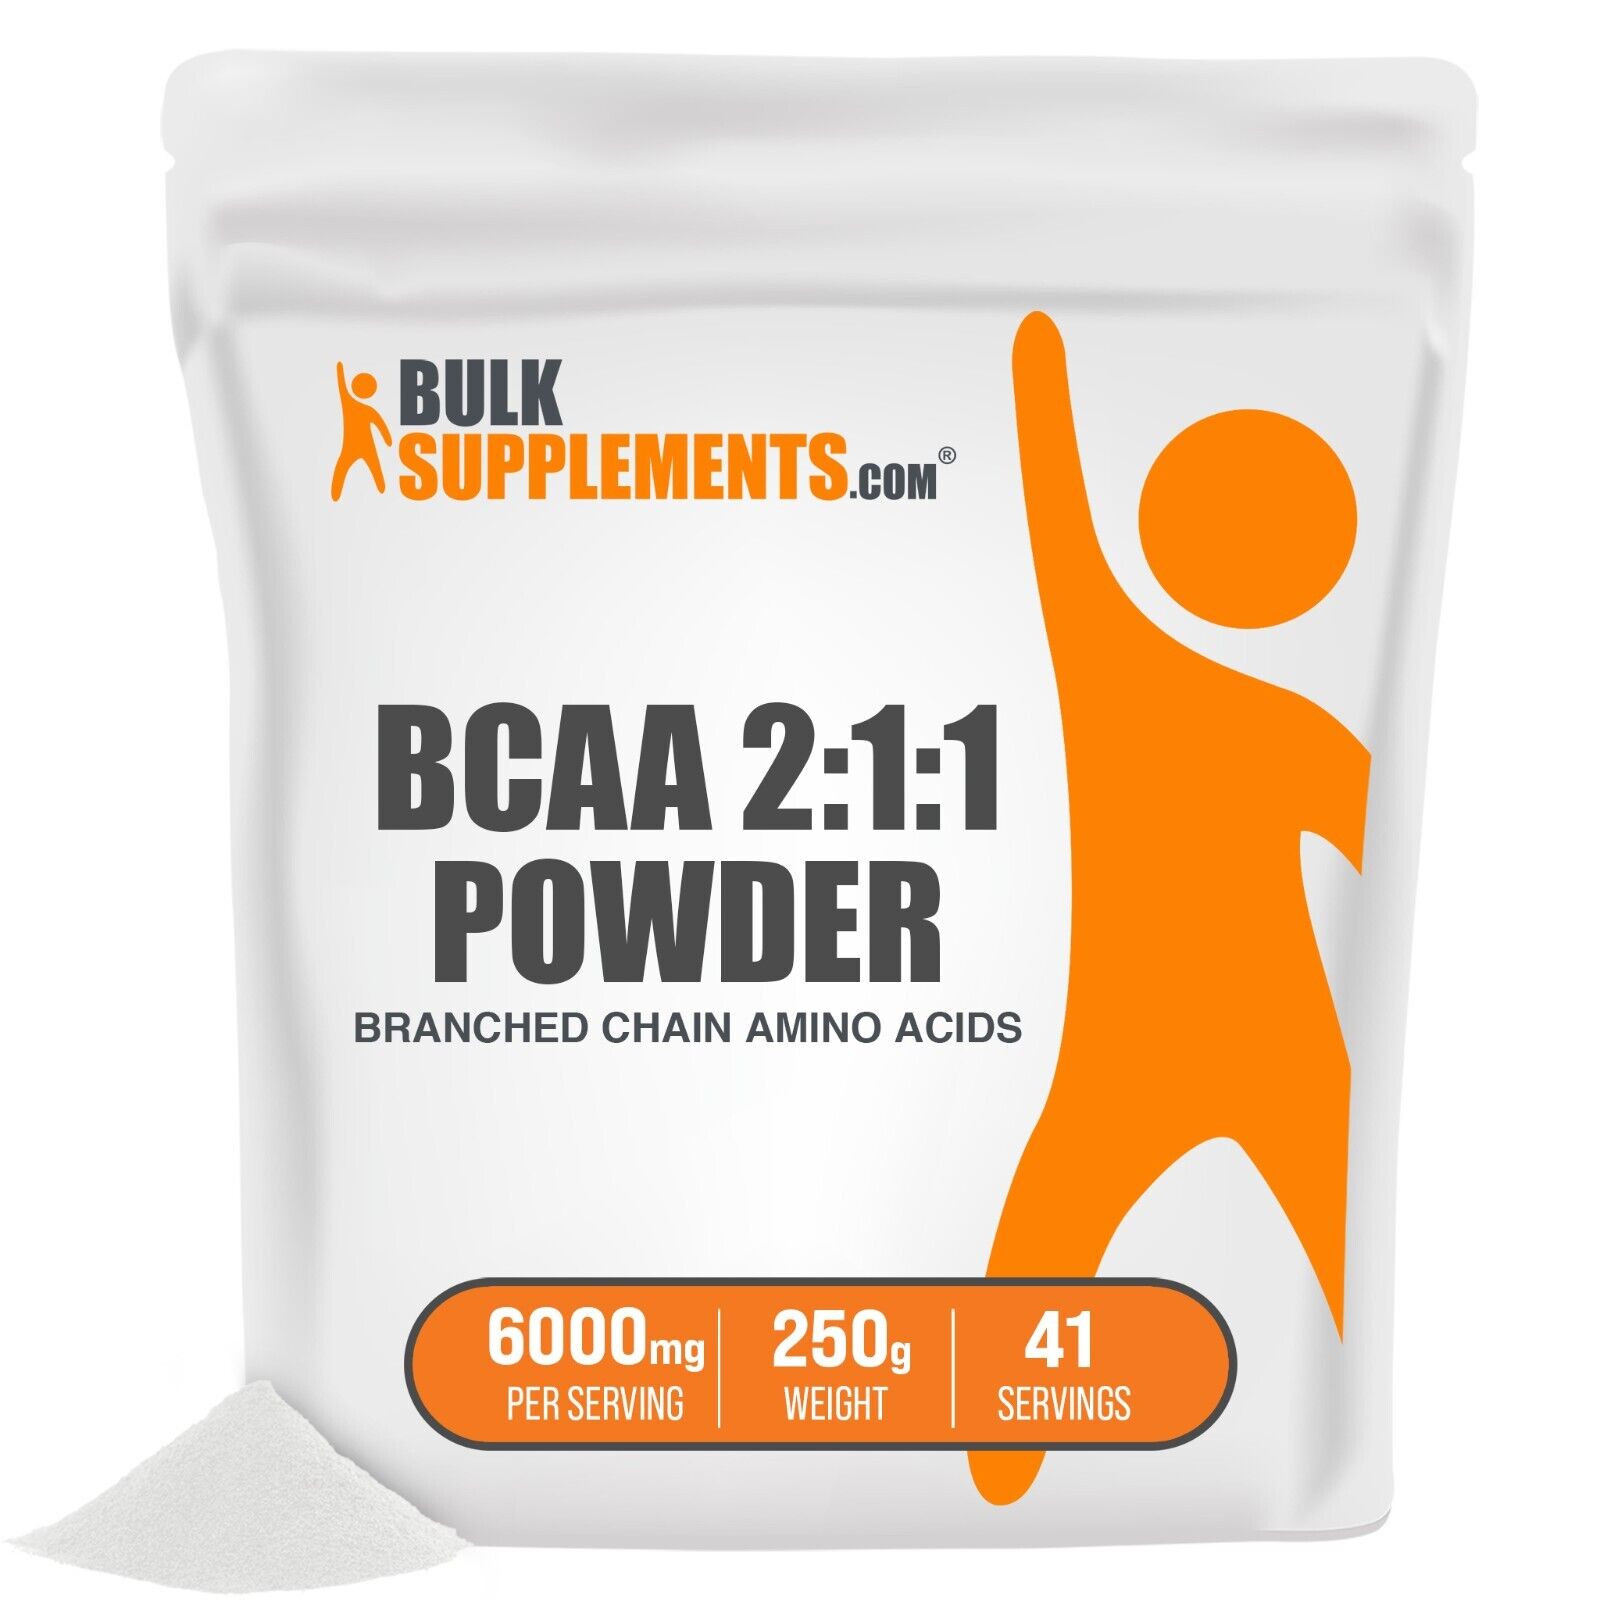 BULKSUPPLEMENTS.COM BCAA 2:1:1 Powder - Branched Chain Amino Acids - BCAA Powder - BCAAs Amino Acids Powder - Amino Acid Powder - 6000mg per Serving, 42 Servings (250 Grams - 8.8 oz)